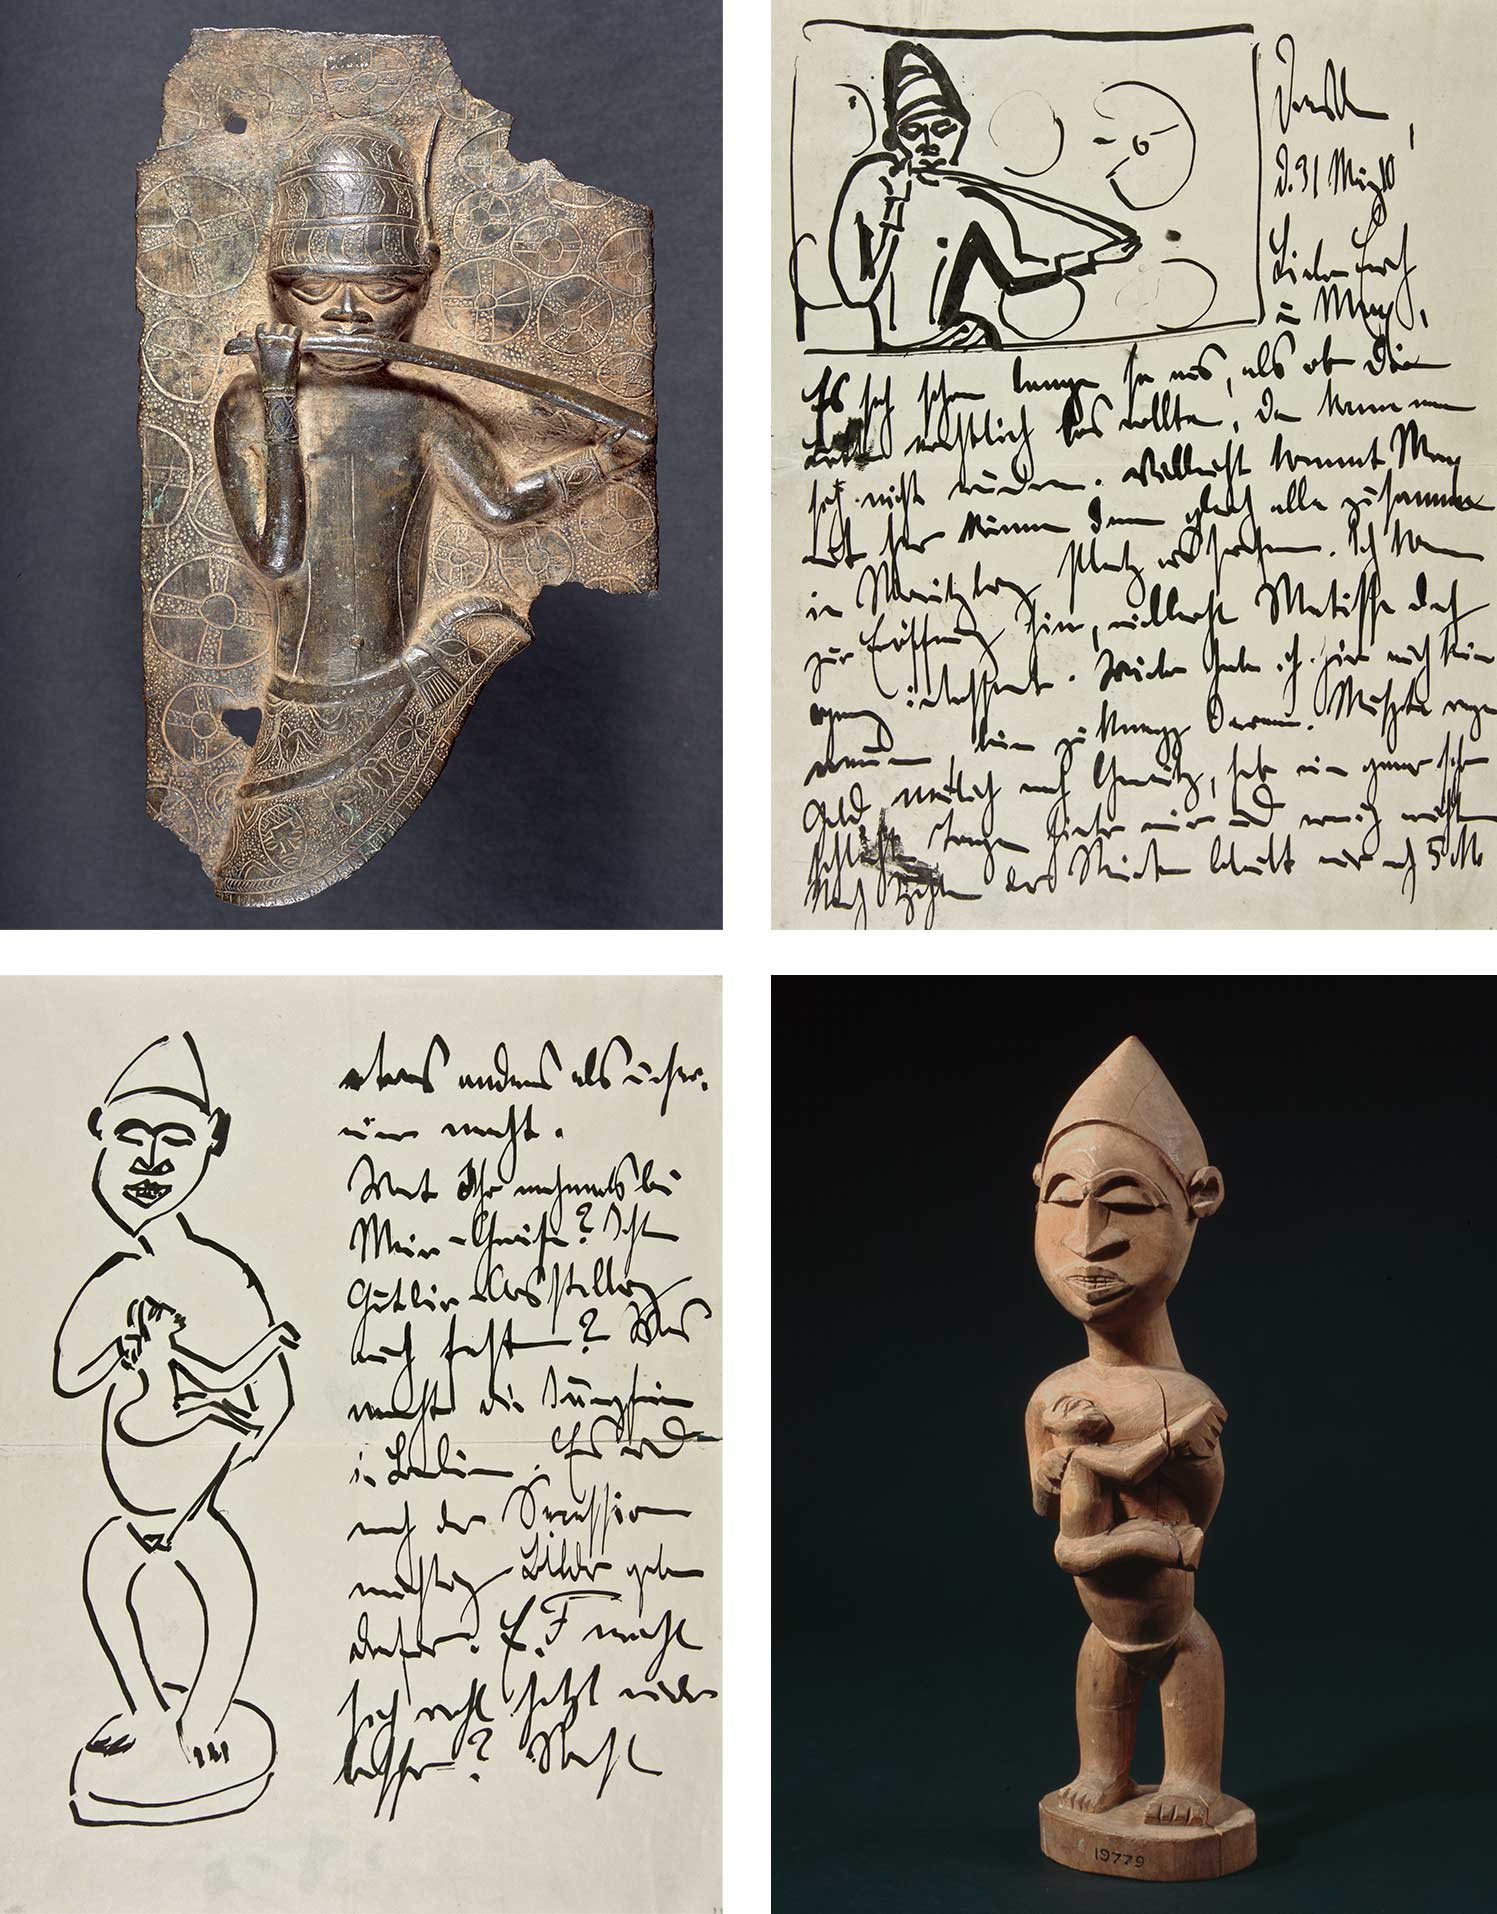 Museum encounters. Clockwise from top left: unrecorded artist, Kingdom of Benin, Nigeria, Relief of Royal Horn Player, 16th-17th century, brass, 30 x 18 cm, Museum für Völkerkunde Dresden, Inv.-Nr. 16090, photo by Eva Winkler, ©Staatliche Kunstsammlungen Dresden; Ernest Ludwig Kirchner, Letter from Dresden to Erich Heckel and Max Pechstein in Berlin, March 31, 1910, ink on paper, 28.5 x 22.4 cm, SHMH-Altonaer Museum, Inv.-Nr. 1964-289,1; unrecorded artist, Figure with Child, Buma People, Democratic Republic of Congo, before 1892, wood, 33 x 9 x 8 cm, Museum für Völkerkunde Dresden, Inv.-Nr. 19779, photo by Eva Winkler, ©Staatliche Kunstsammlungen Dresden; Ernest Ludwig Kirchner, Letter from Dresden to Erich Heckel and Max Pechstein in Berlin, March 31, 1910, ink on paper, 28.5 x 22.4 cm, SHMH-Altonaer Museum, Inv.-Nr. 1964-289,3.